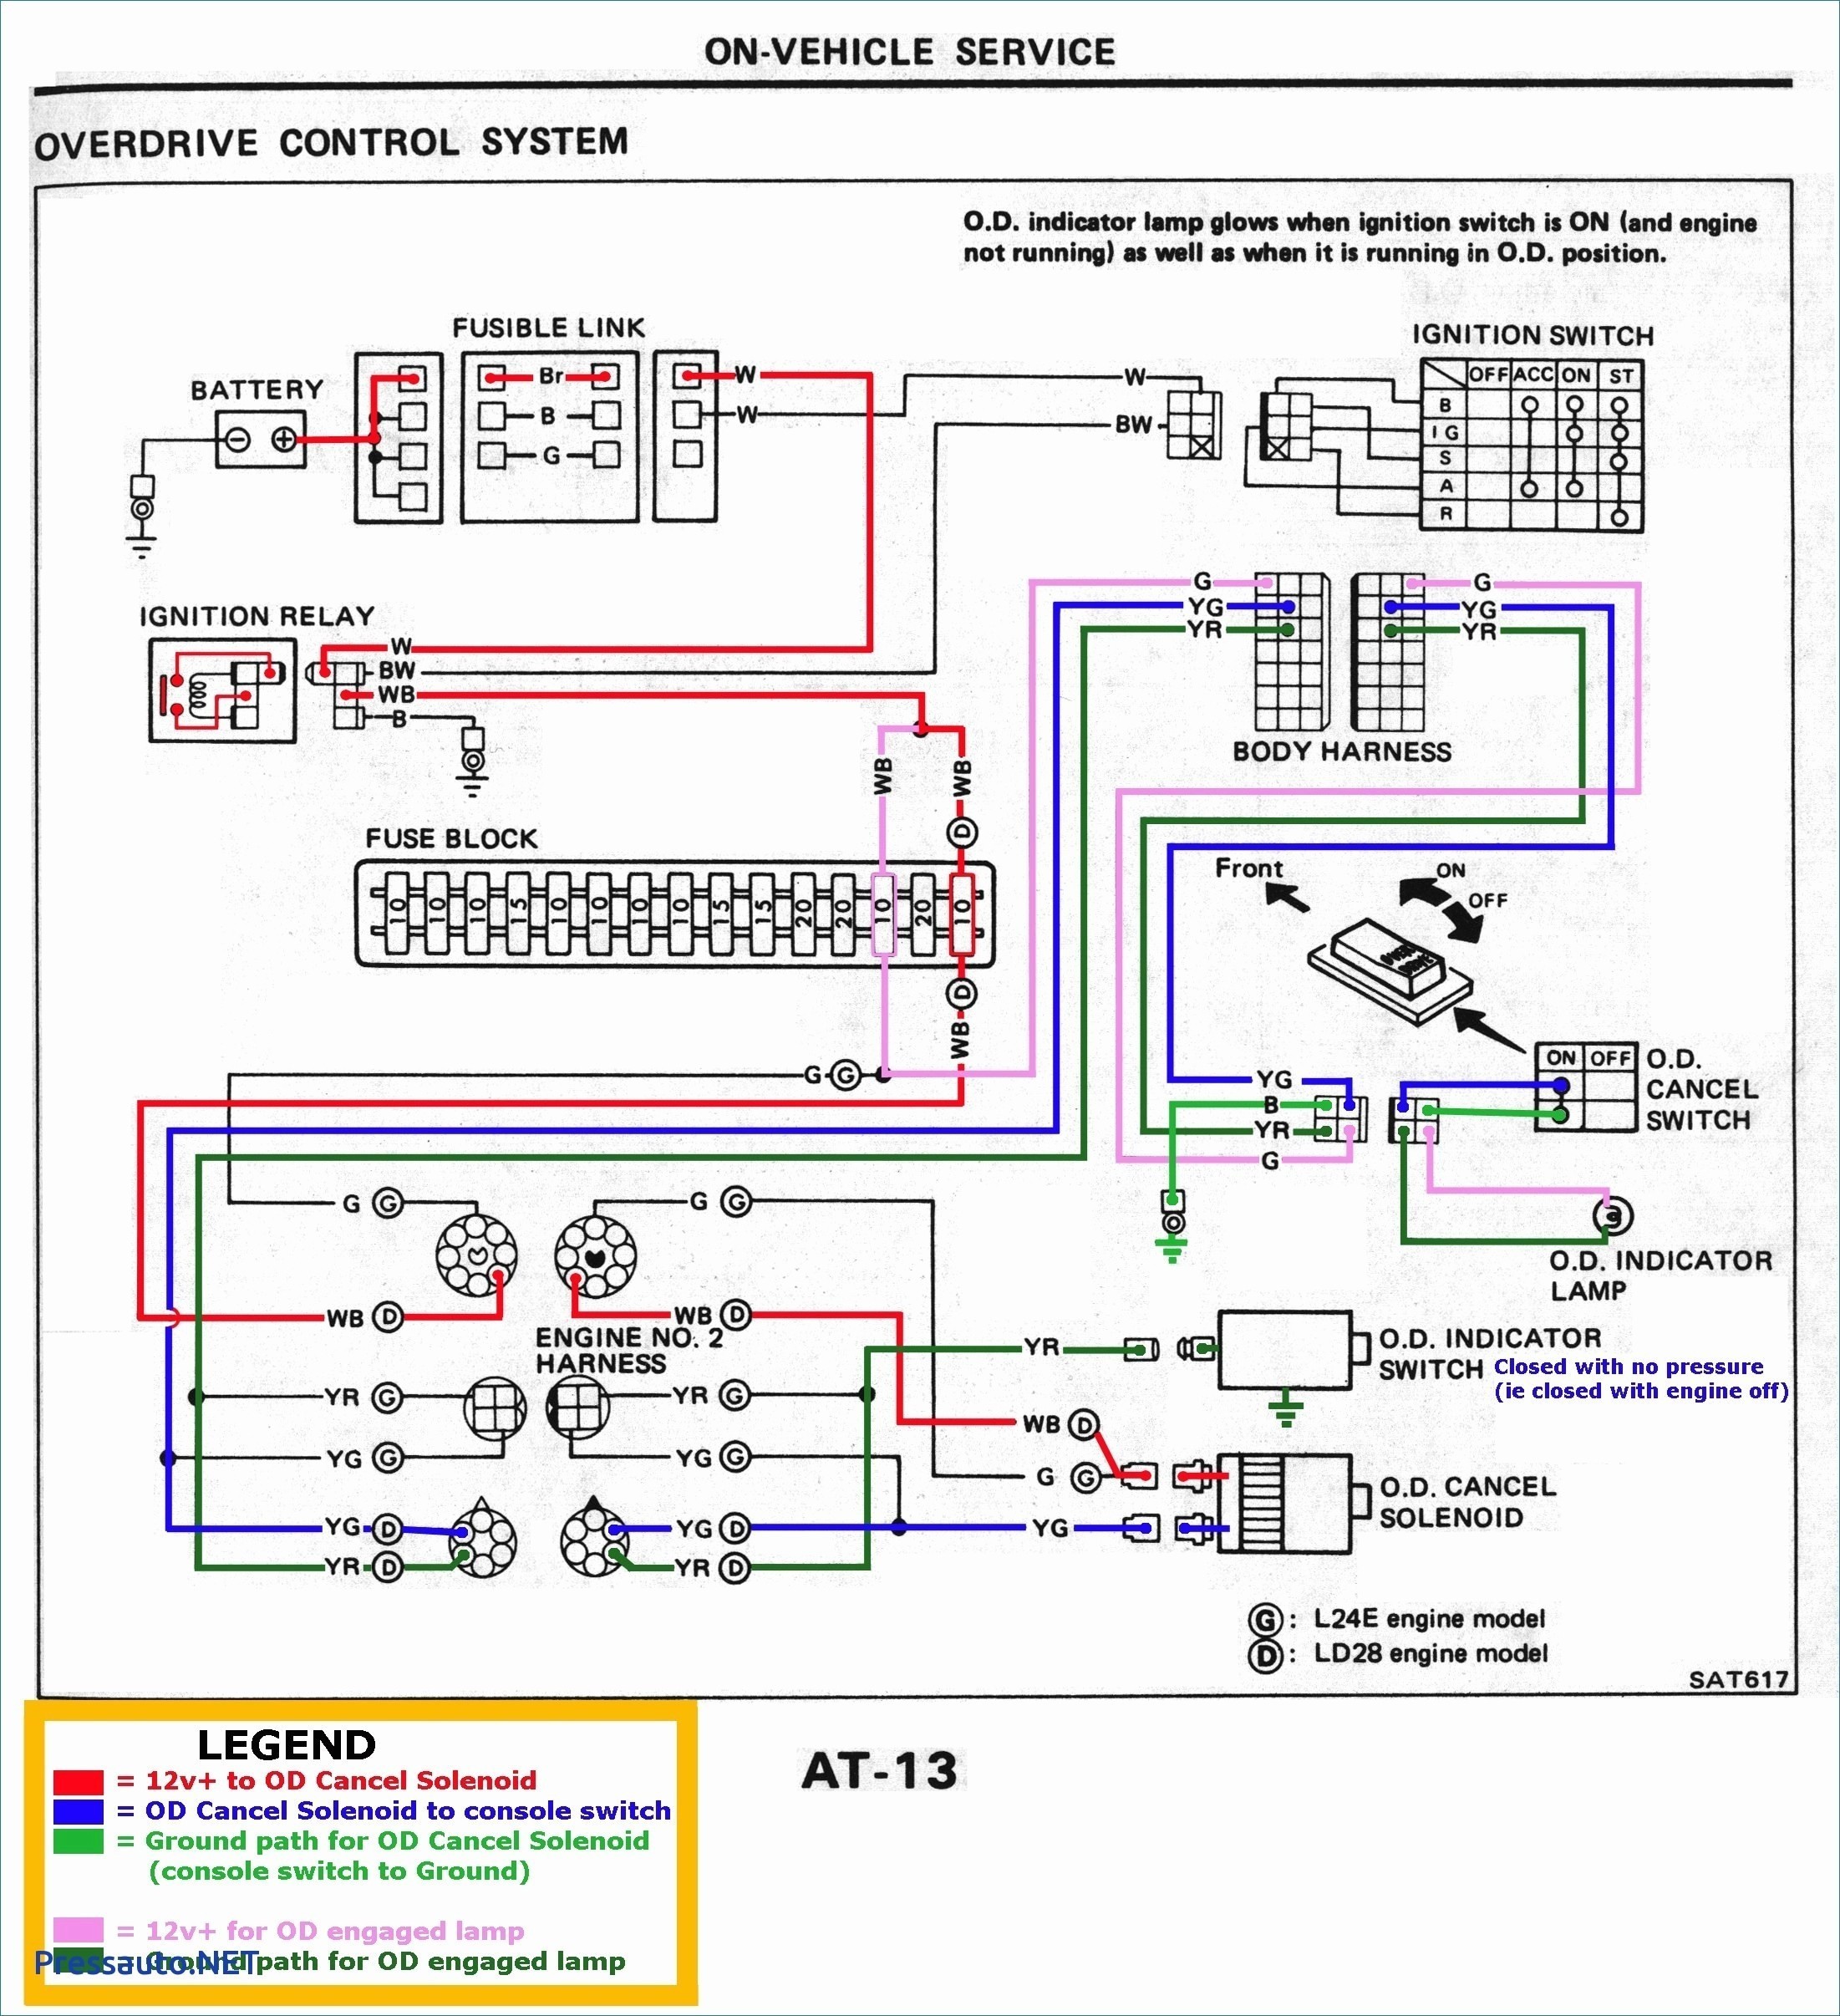 Wiring Diagram Outlet Switch bo Save Wiring Diagram for Light Switch and Outlet Bo Best Used